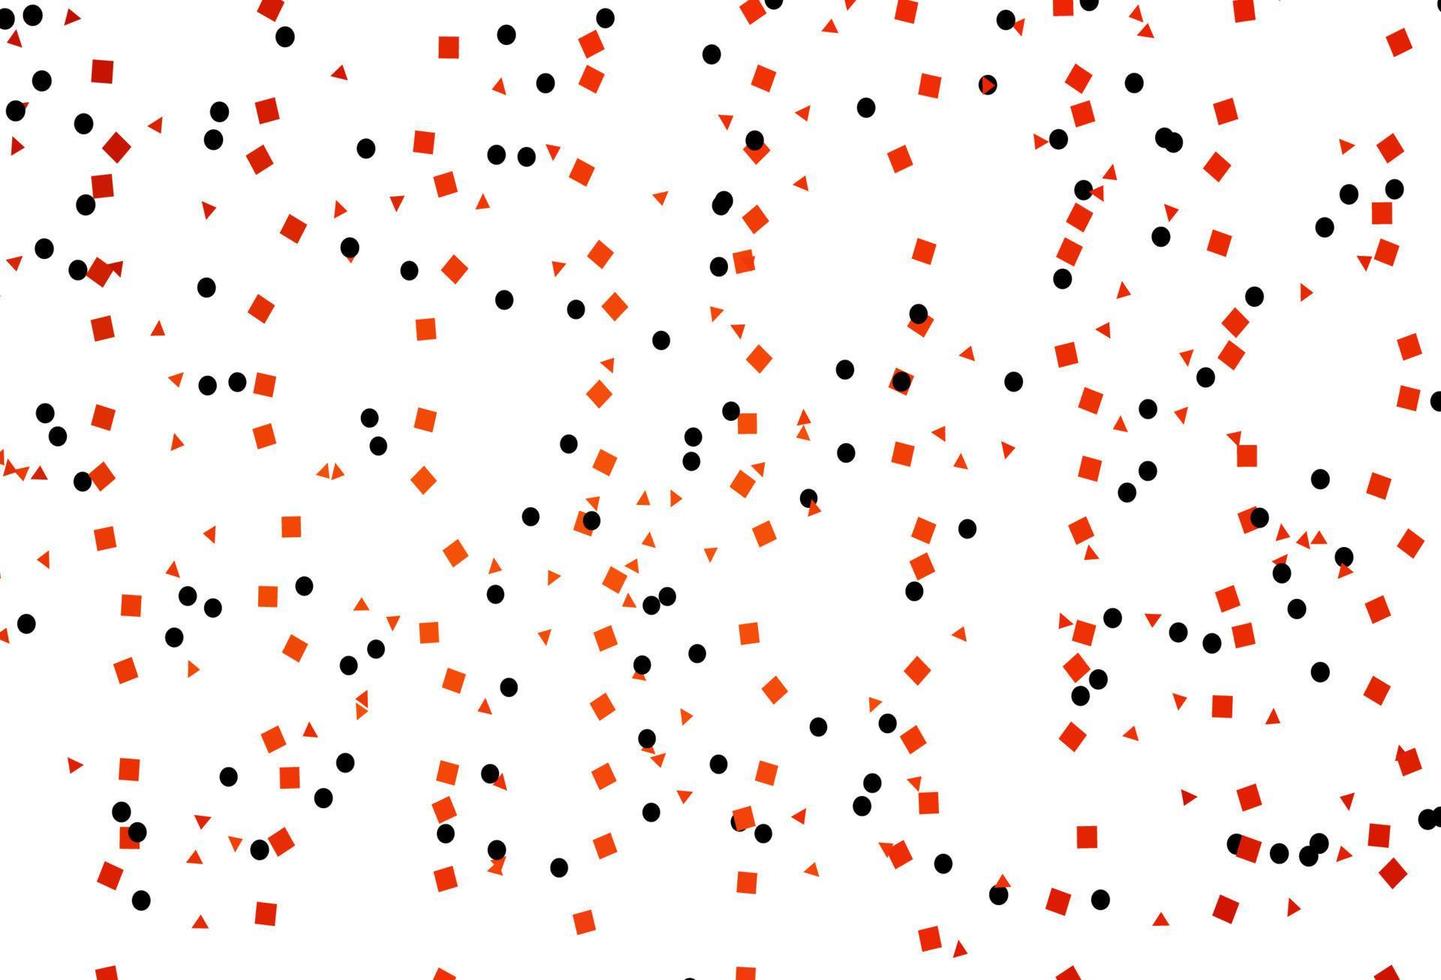 Light Orange vector template with crystals, circles, squares.